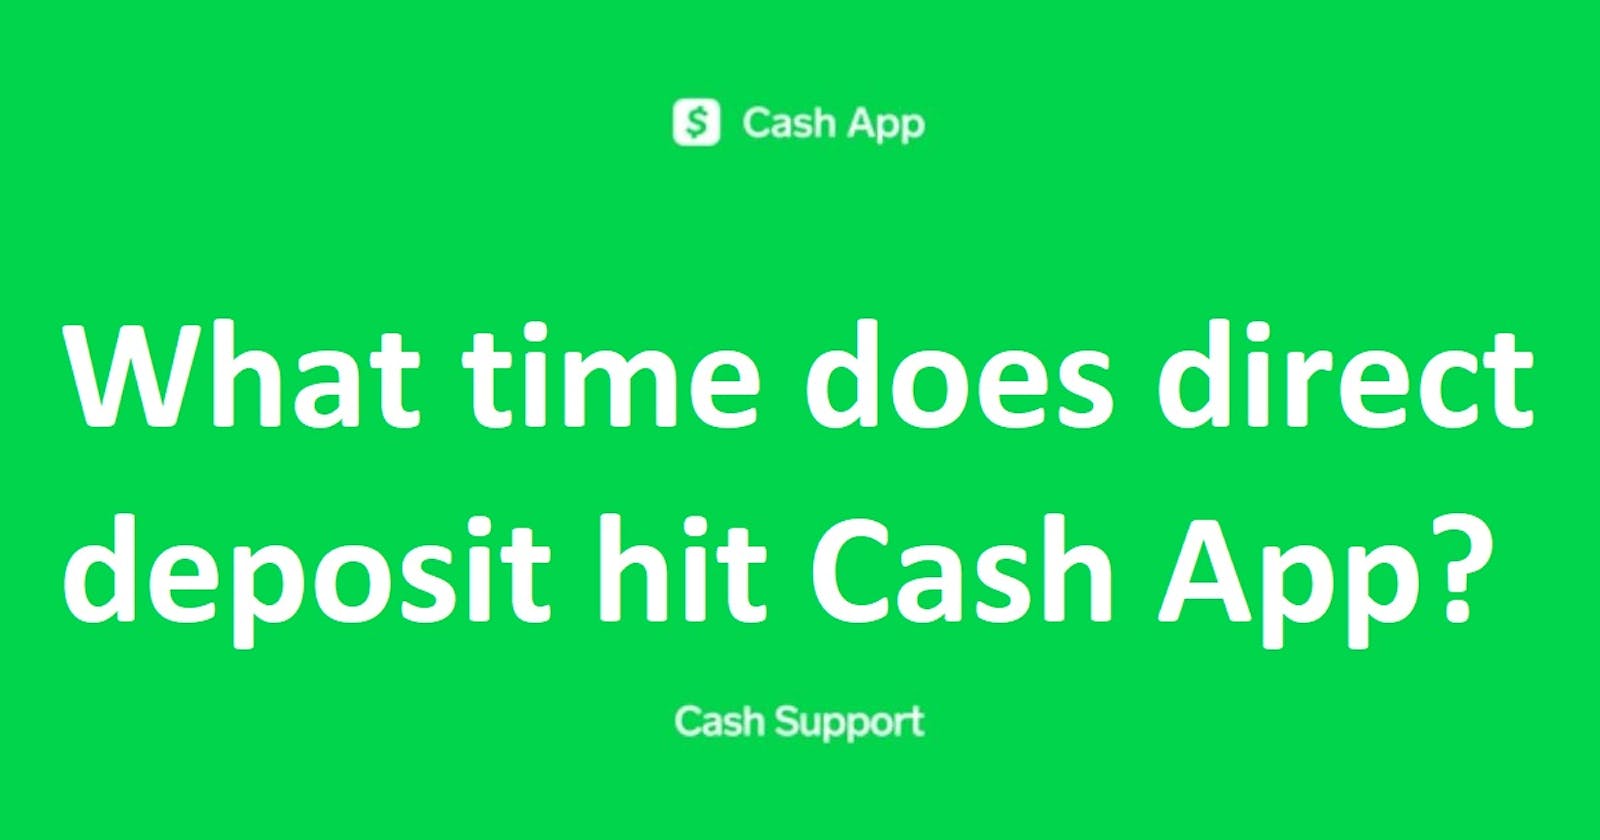 Can Cash App Direct Deposit Hit at 2 AM after a holiday in United States?